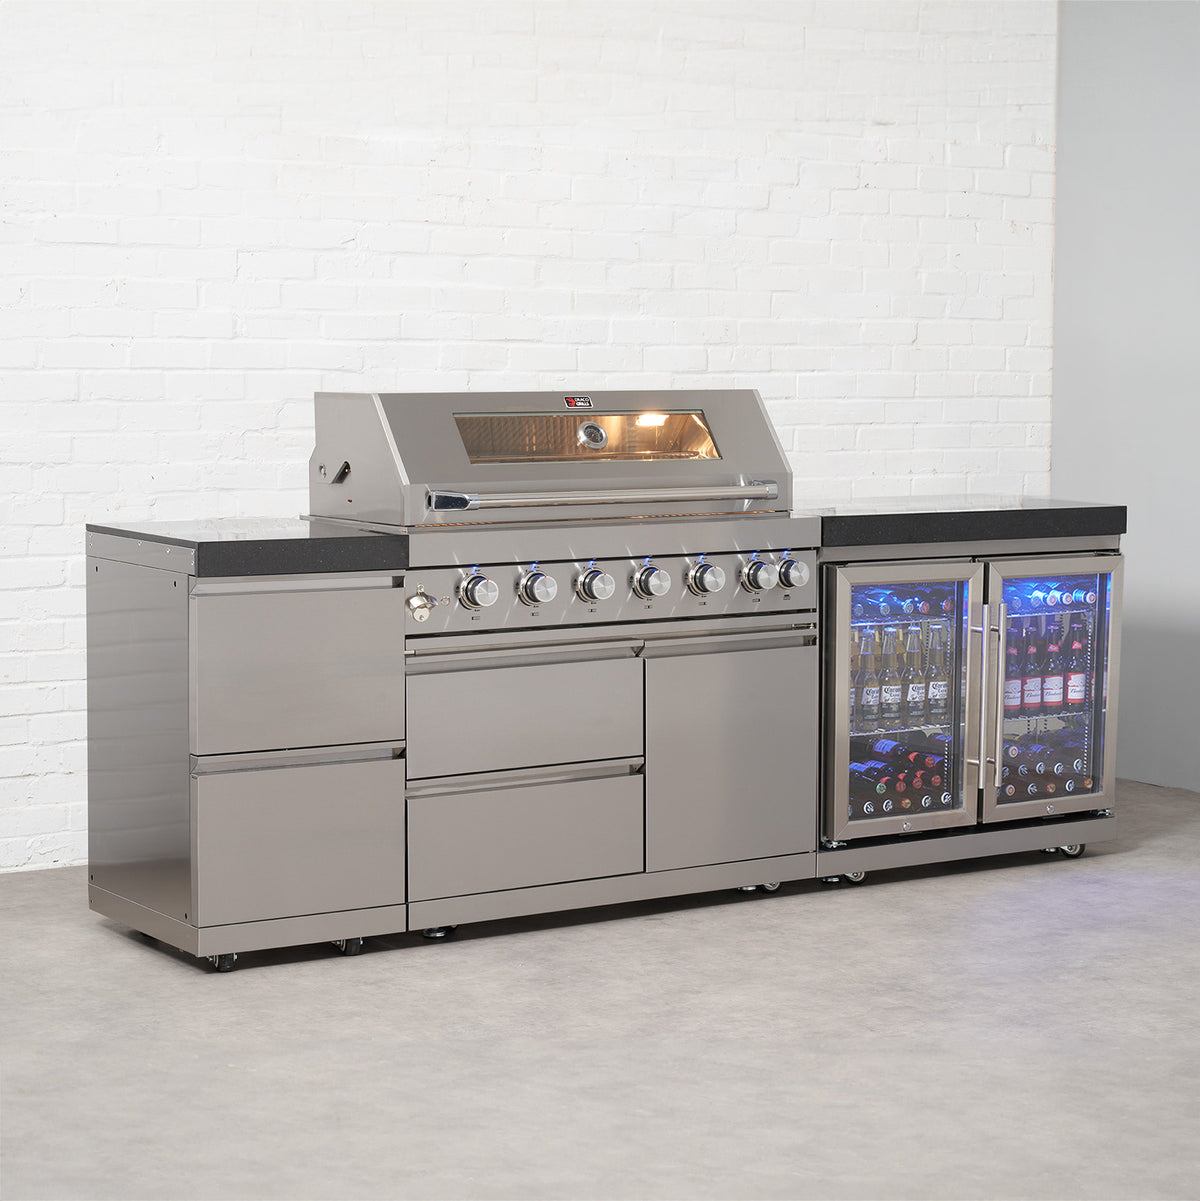 Draco Grills 6 Burner BBQ Modular Outdoor Kitchen with Double Drawers and Double Fridge Unit